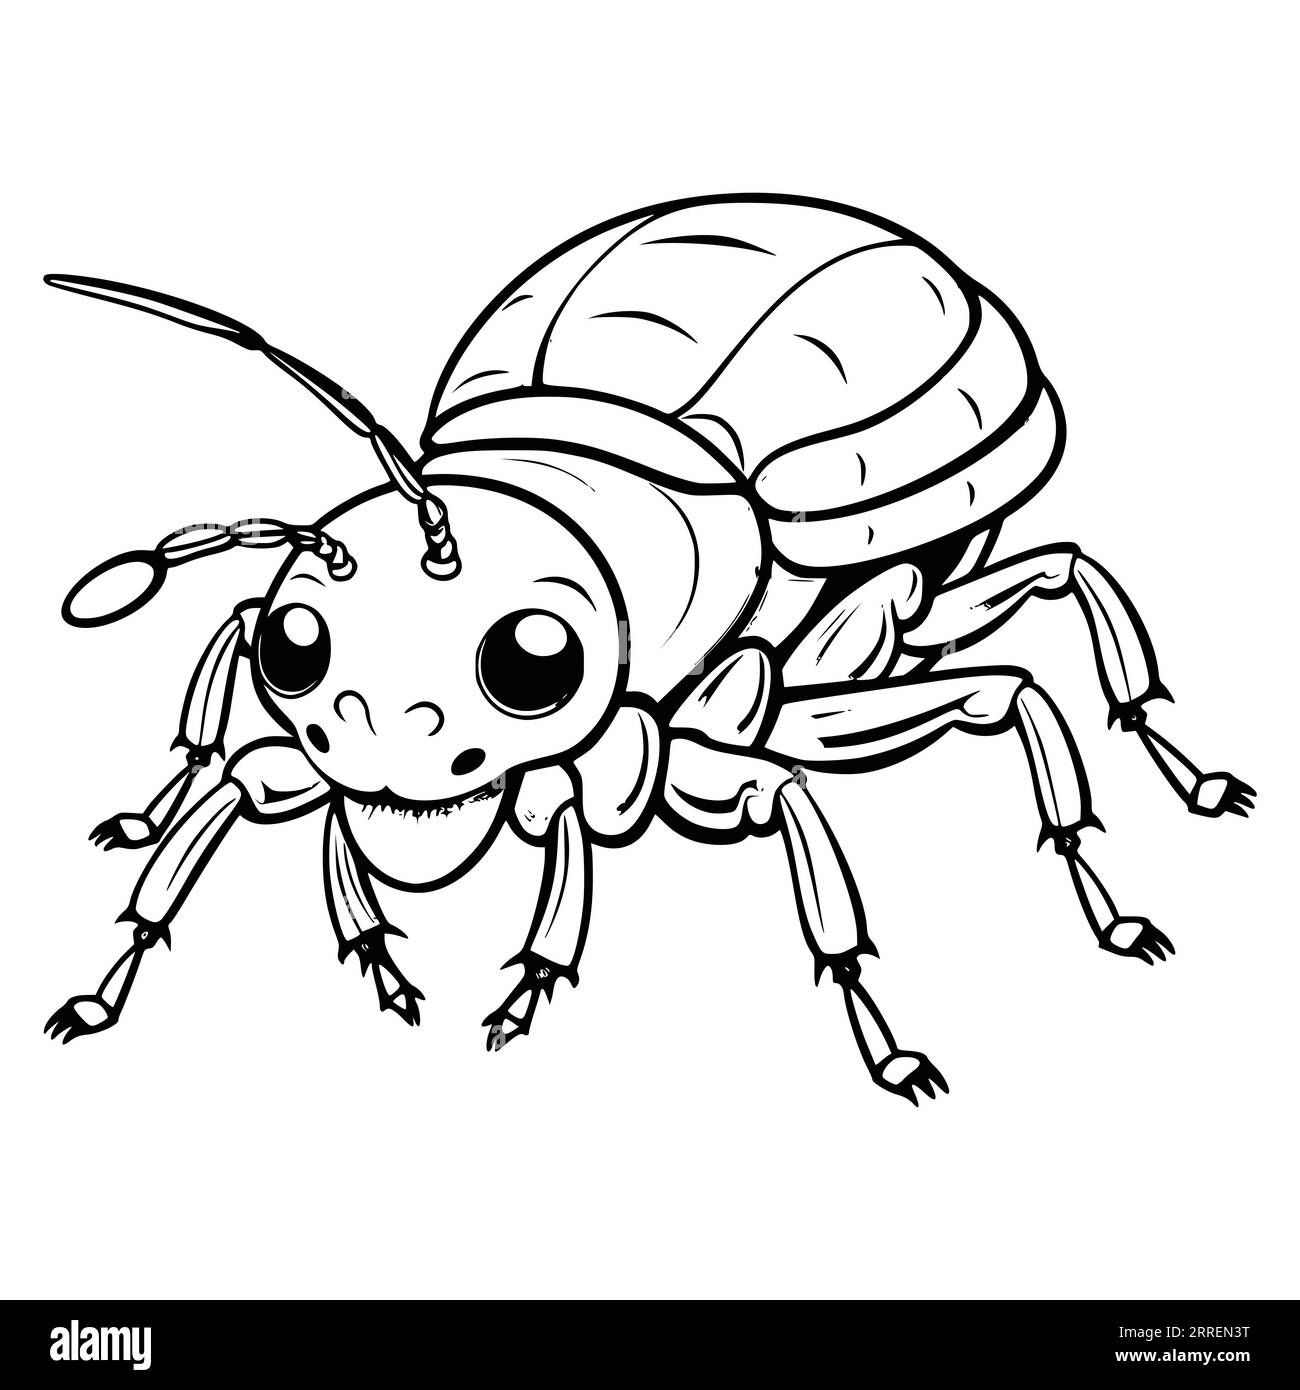 Bed Bugs Coloring Page for Kids Stock Vector